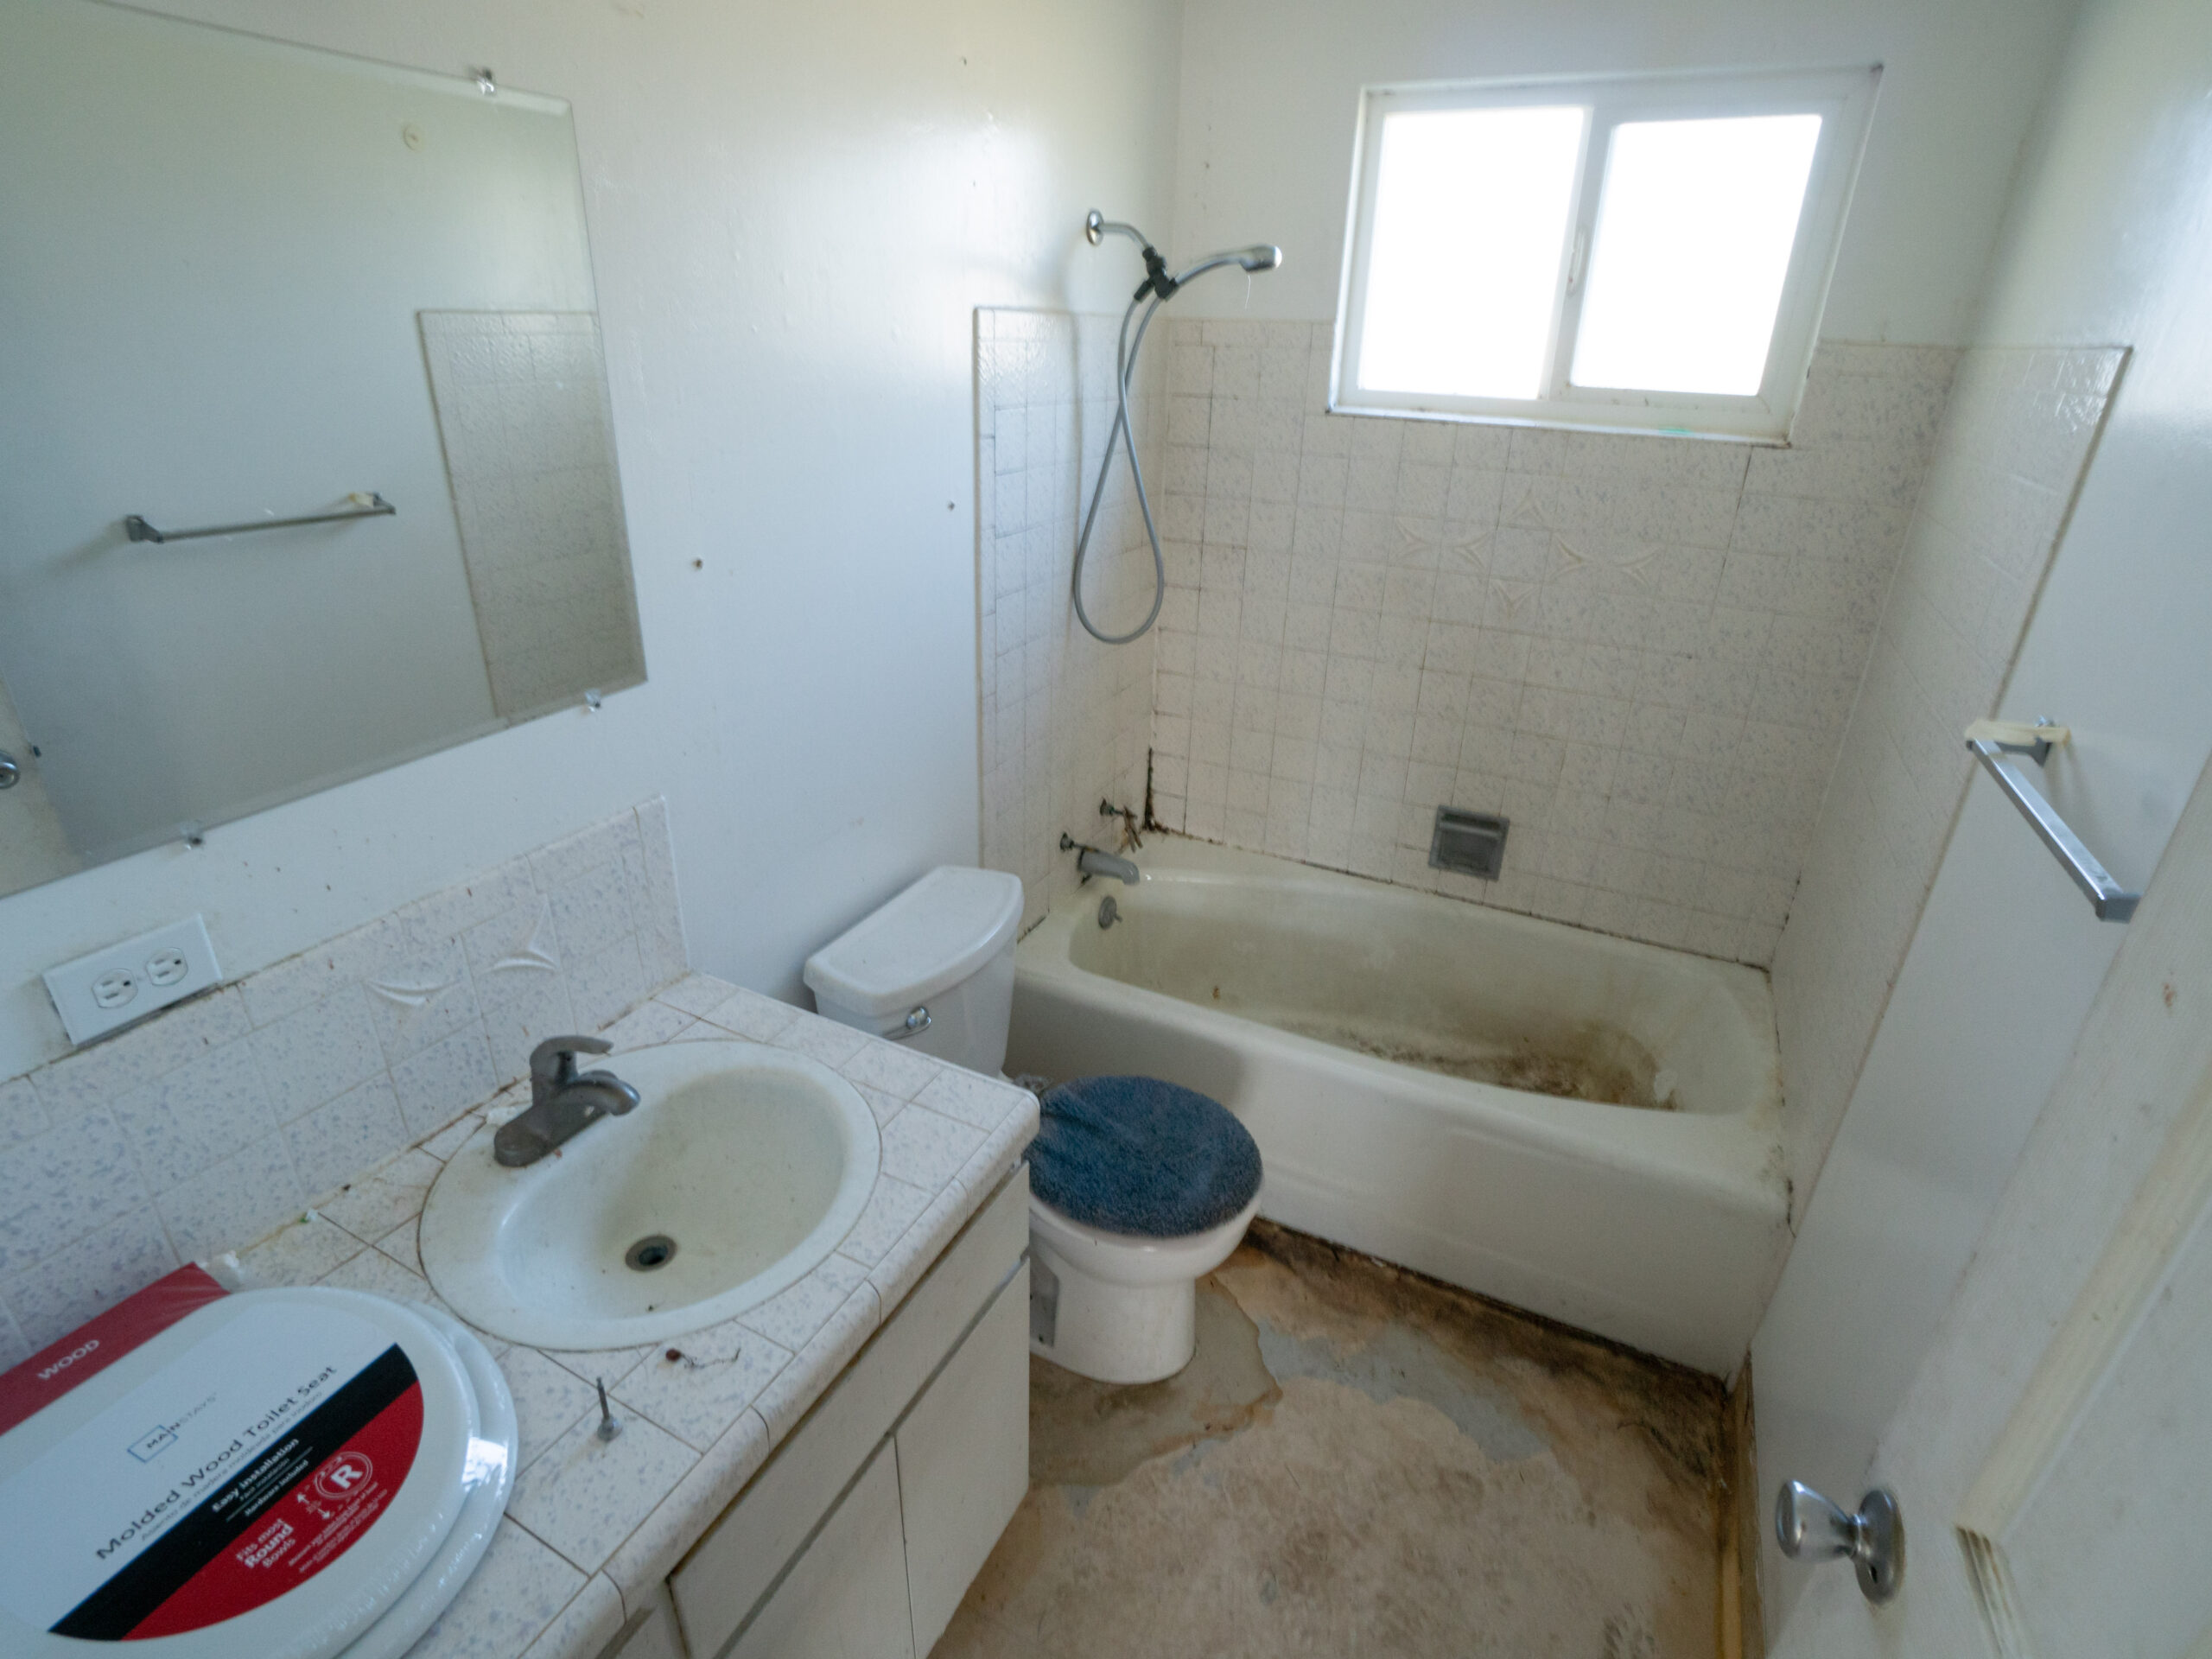 Dirty Bathroom needing to be cleaned and renovated.